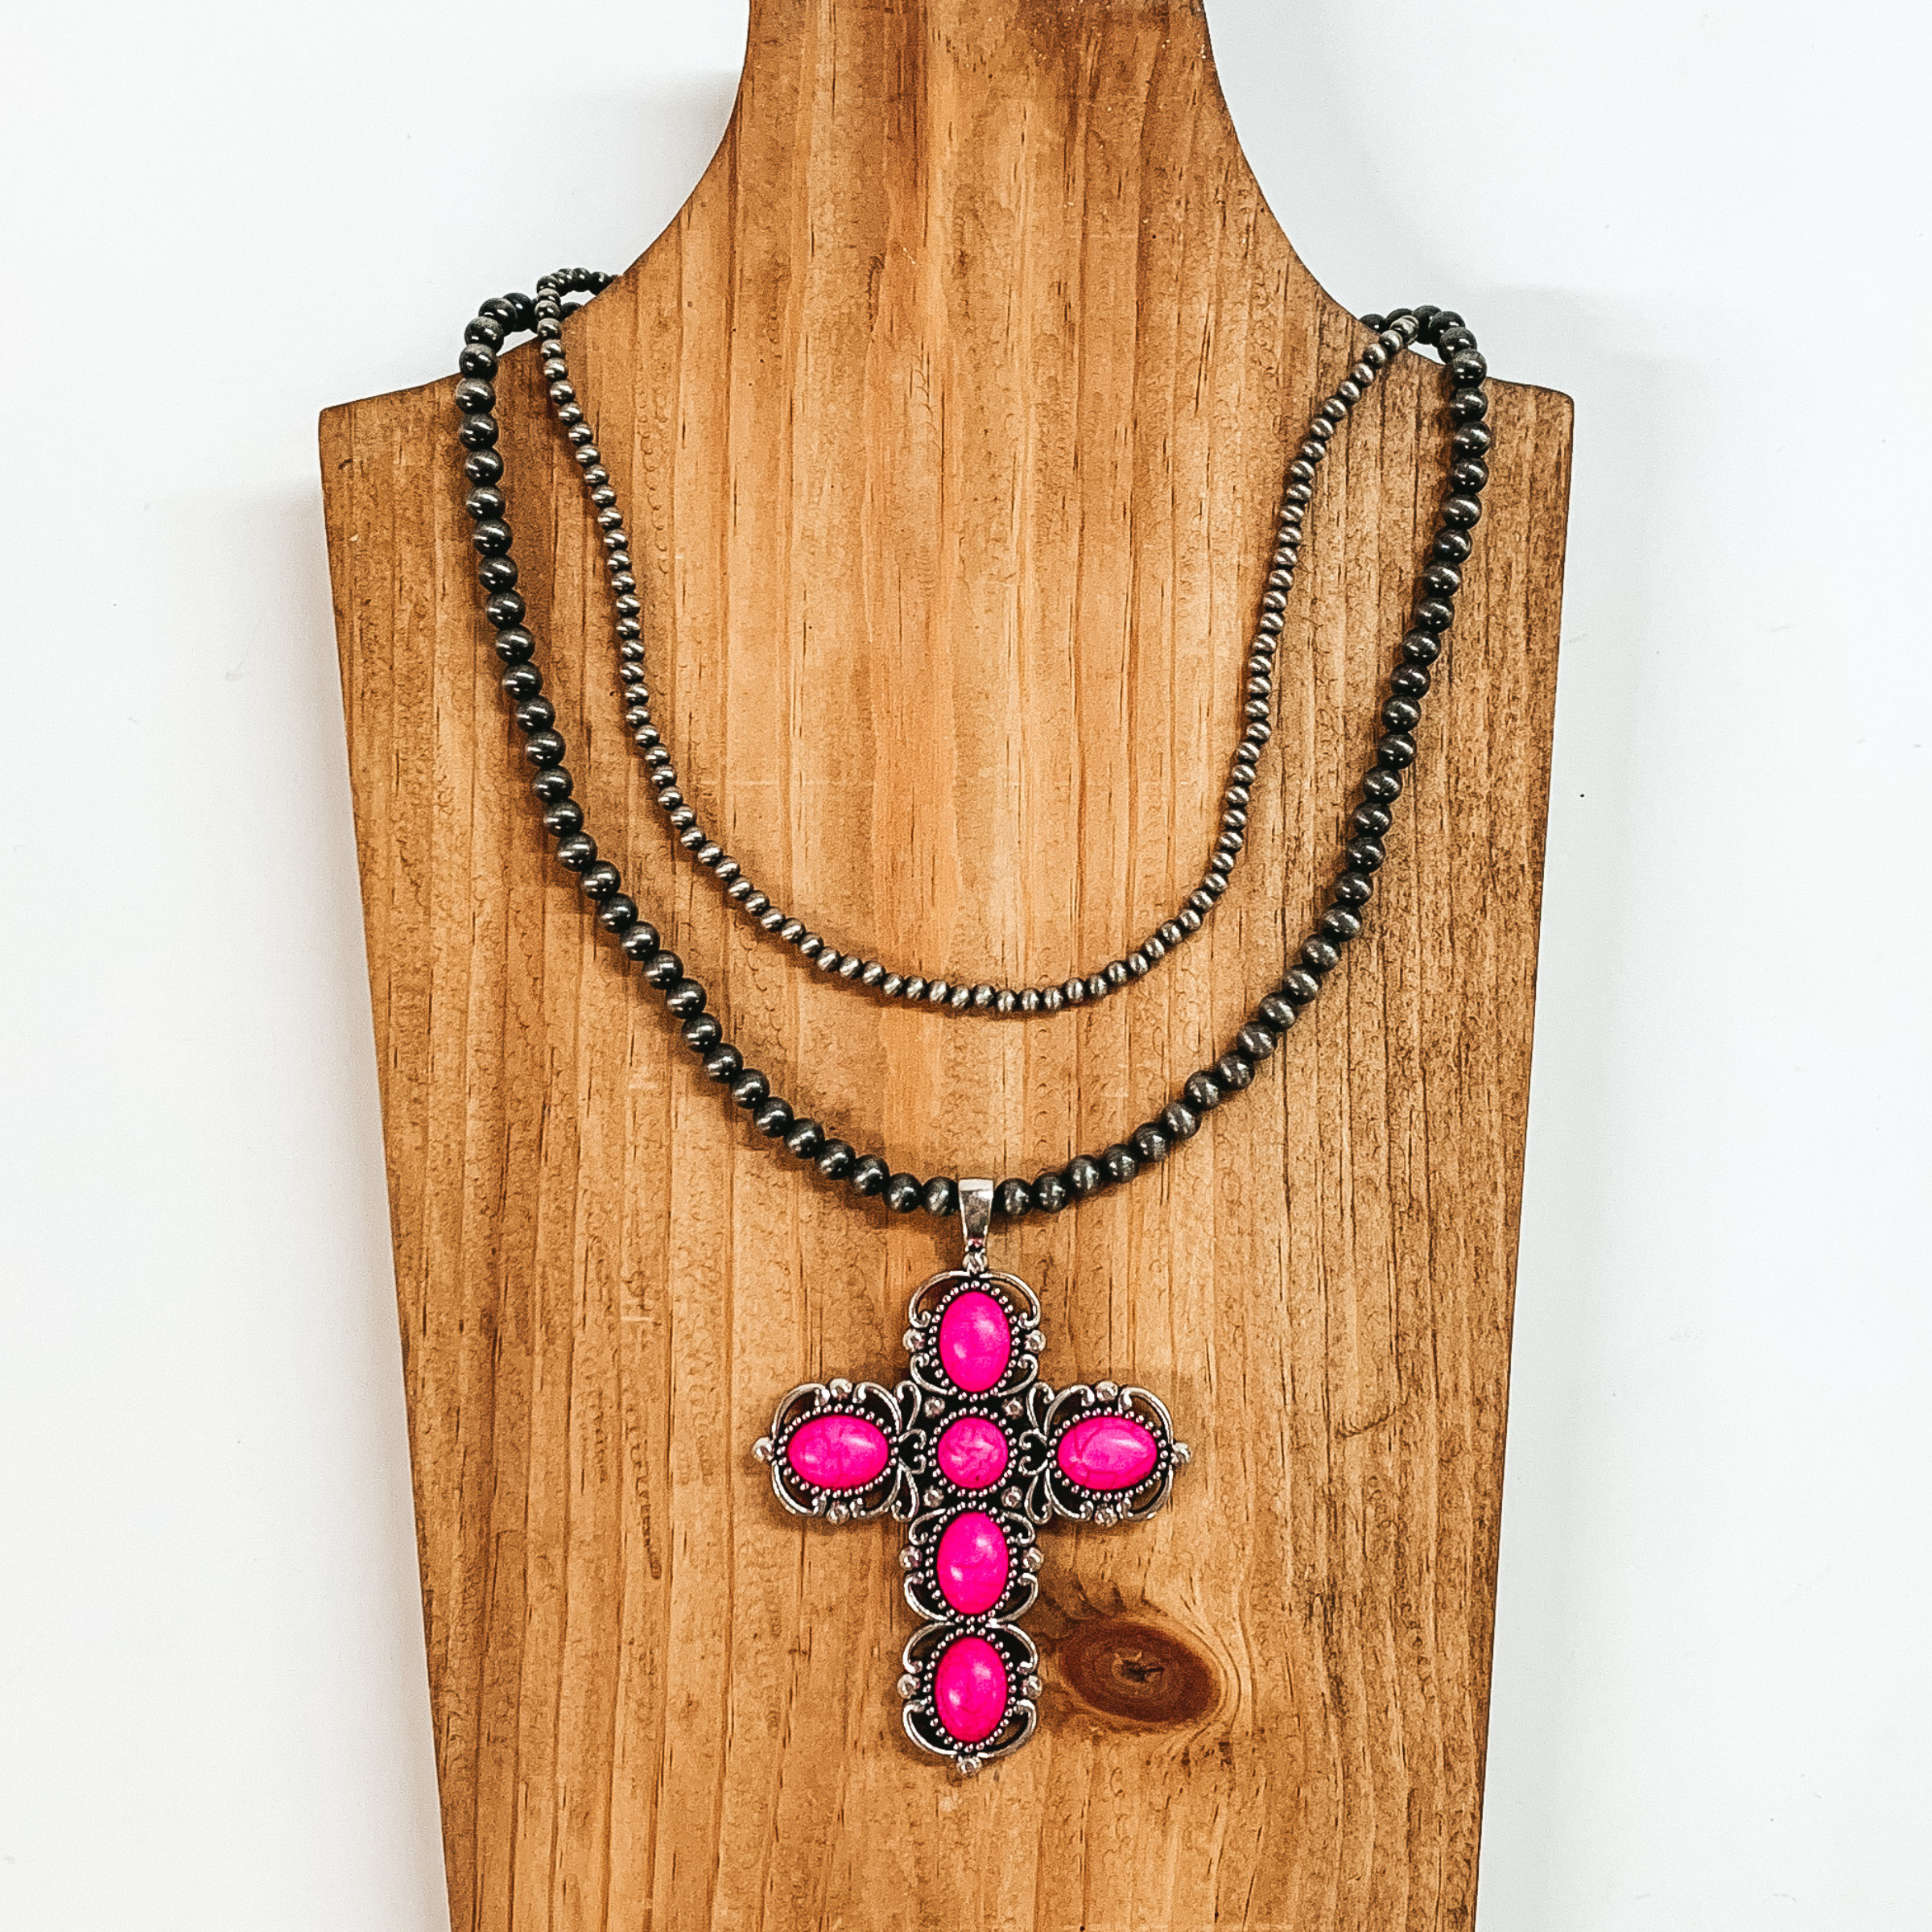 Two strand neckace with different sized silver beaded strands of different lengths with a cross pendant that has pink stones. This necklace is pictured on a wooden necklace holder on a white background. 